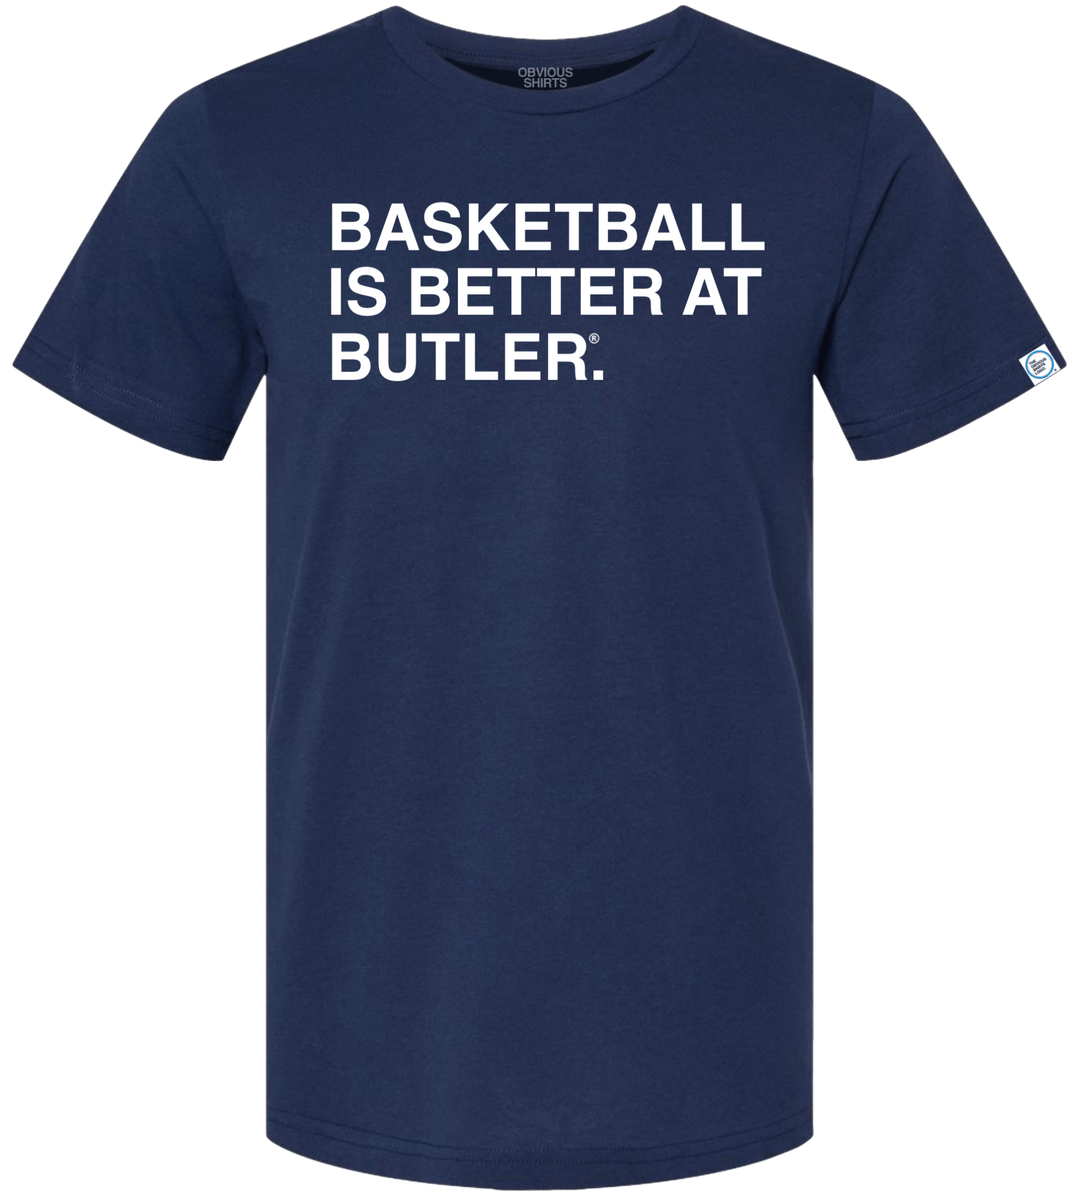 BASKETBALL IS BETTER AT BUTLER. - OBVIOUS SHIRTS